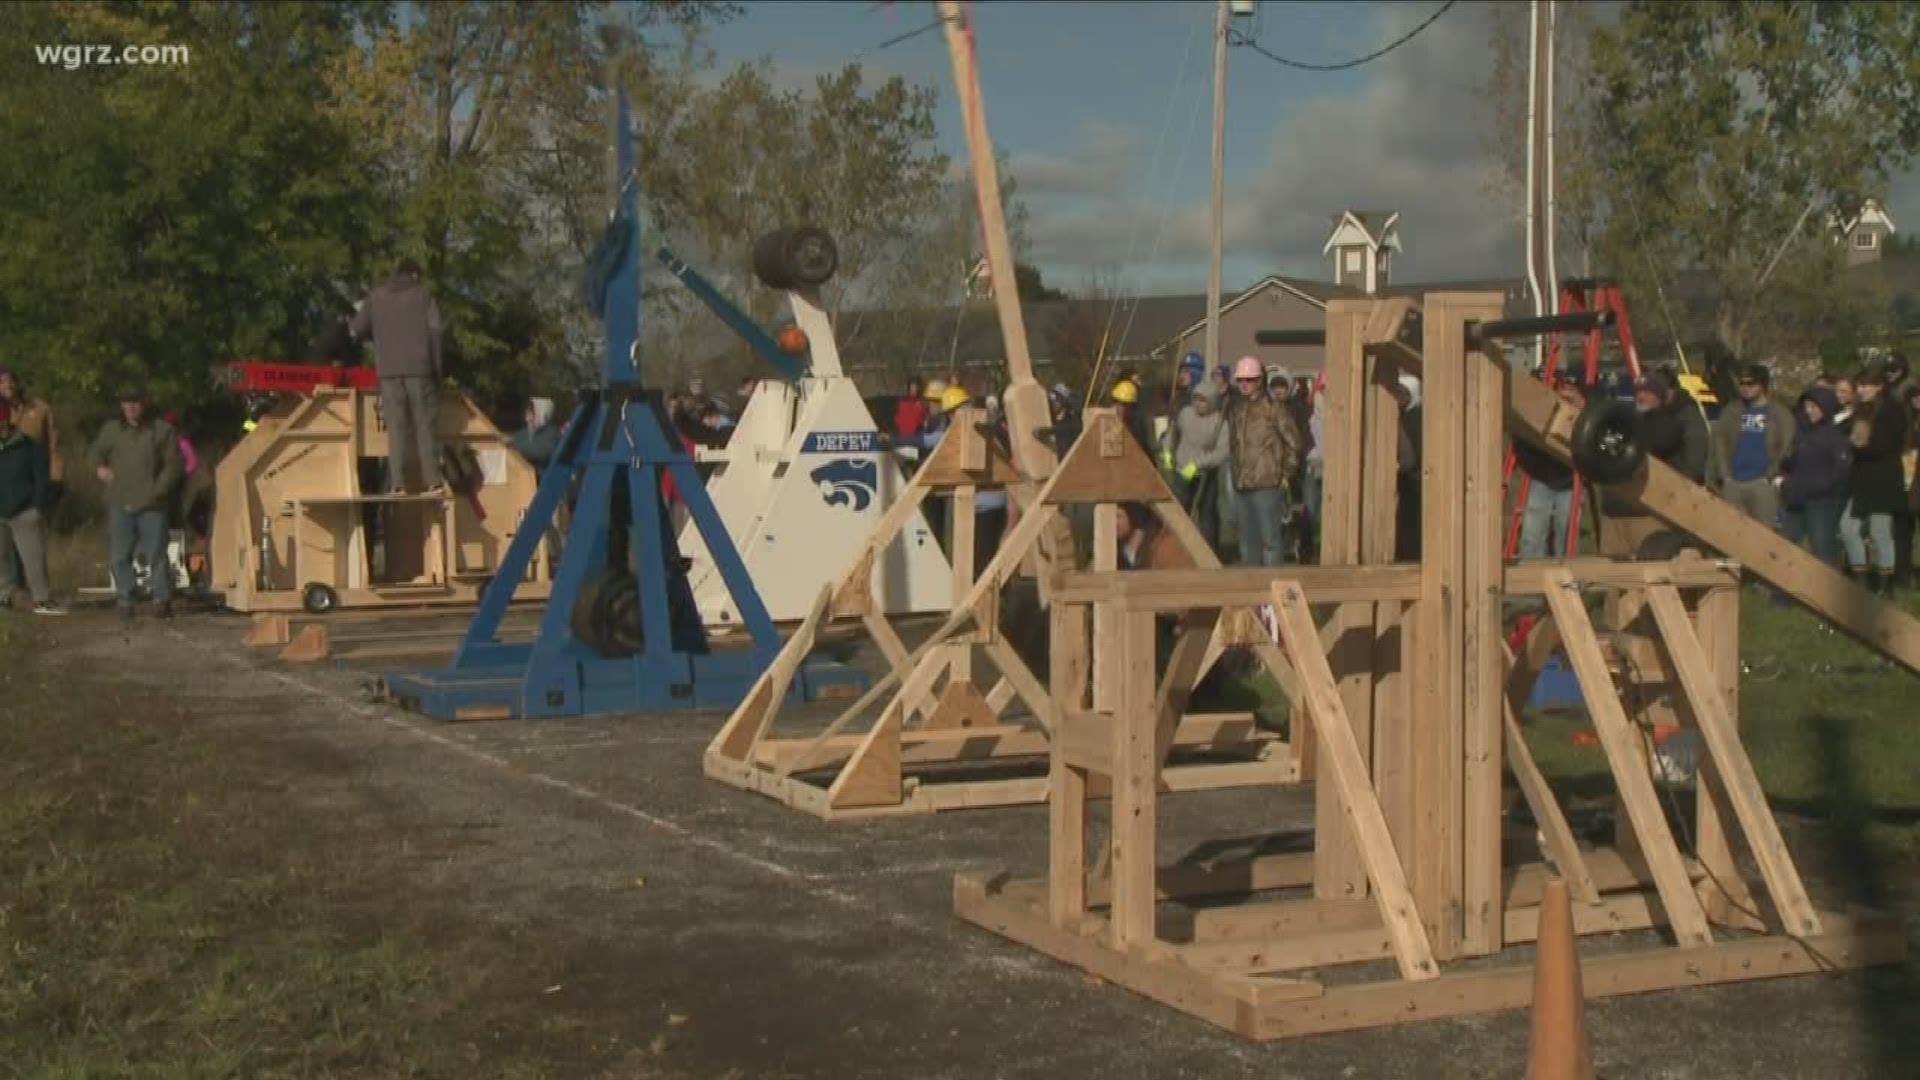 Twelve high school students will compete against each other in this year's trebuchet competition.